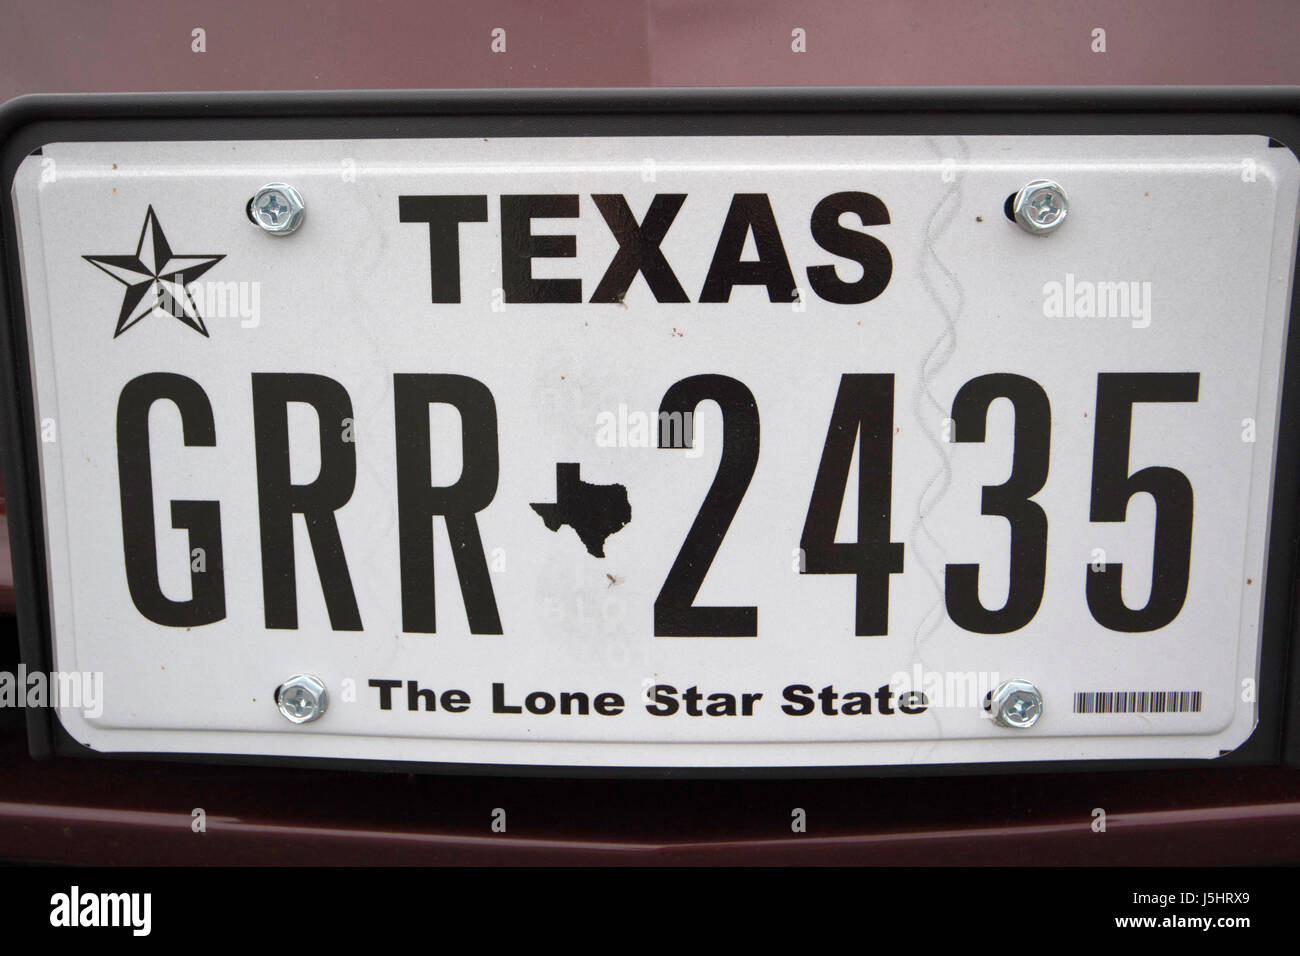 texas the lone star state us state license plate Stock Photo